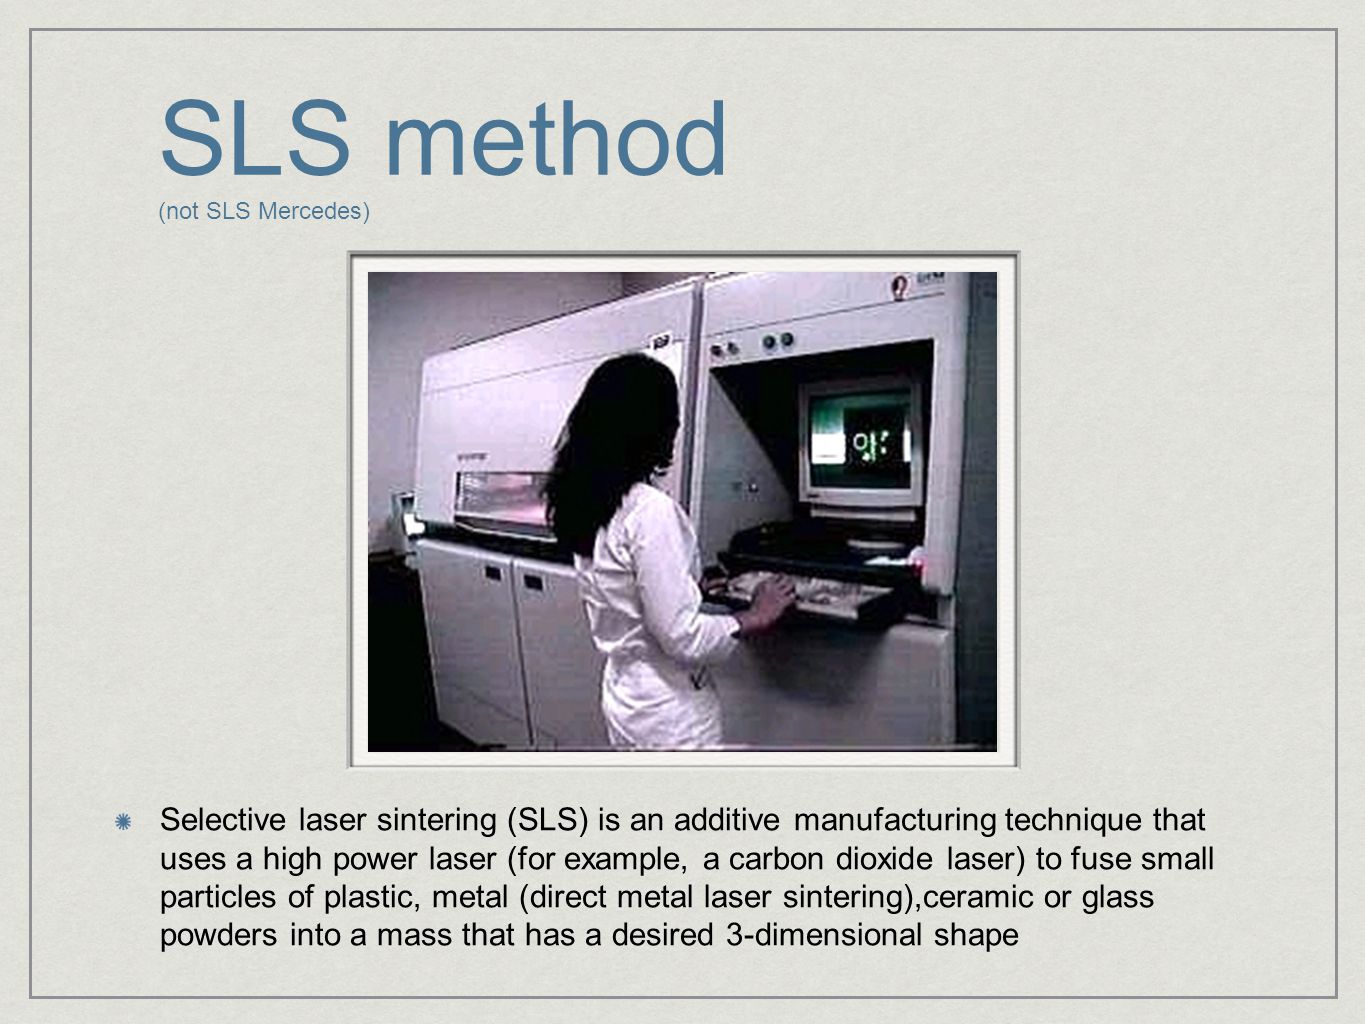 SLS method (not SLS Mercedes) Selective laser sintering (SLS) is an additive manufacturing technique that uses a high power laser (for example, a carbon dioxide laser) to fuse small particles of plastic, metal (direct metal laser sintering),ceramic or glass powders into a mass that has a desired 3-dimensional shape